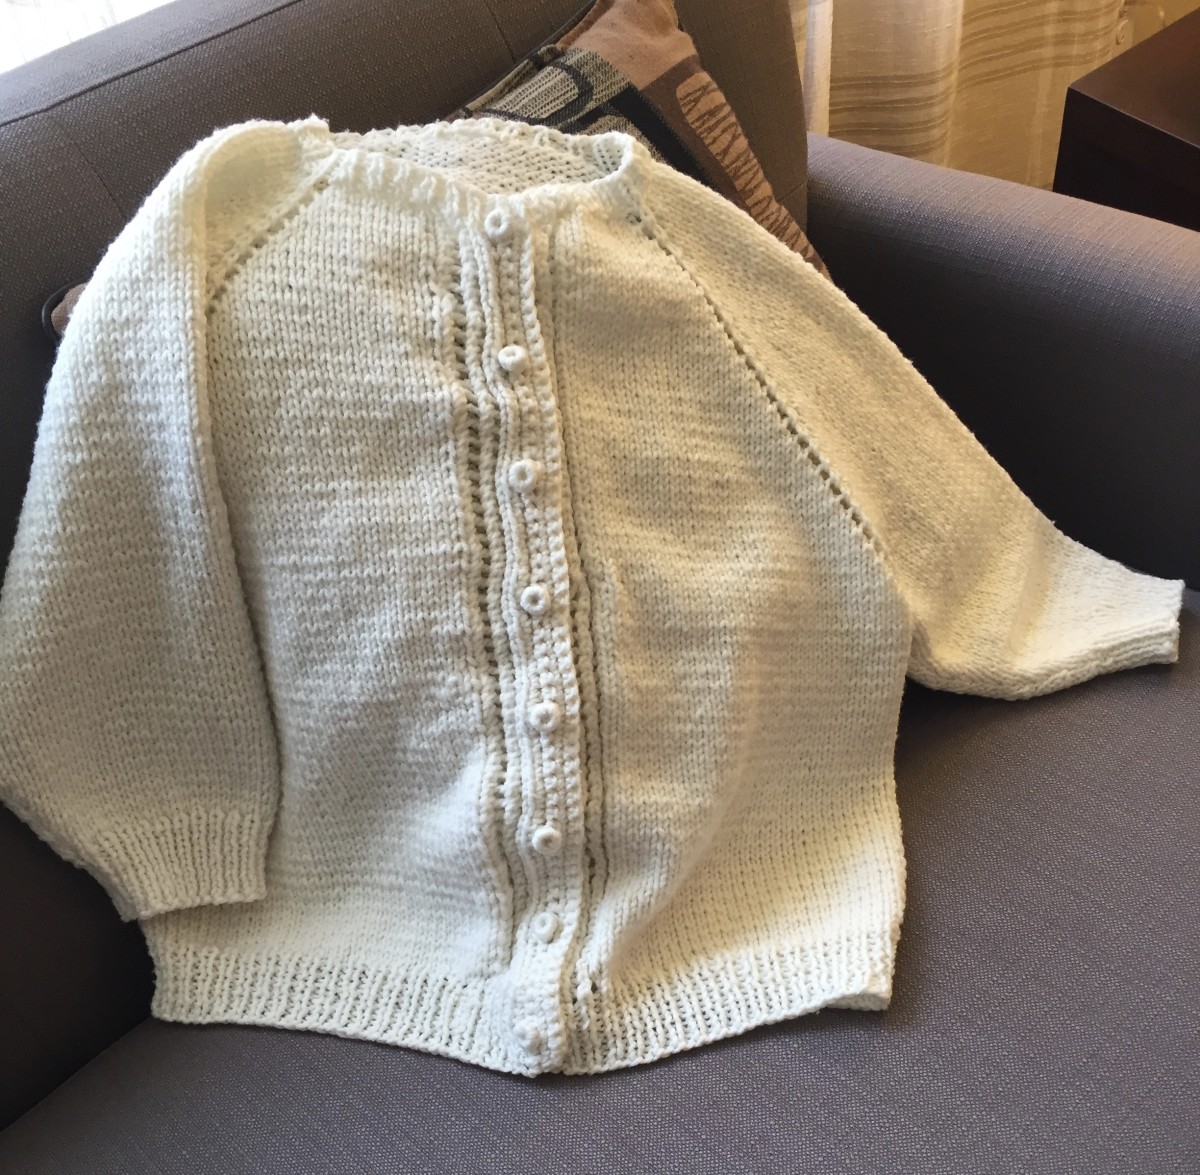 I used a pattern sheet from the 1950s to knit this top-down raglan cardigan